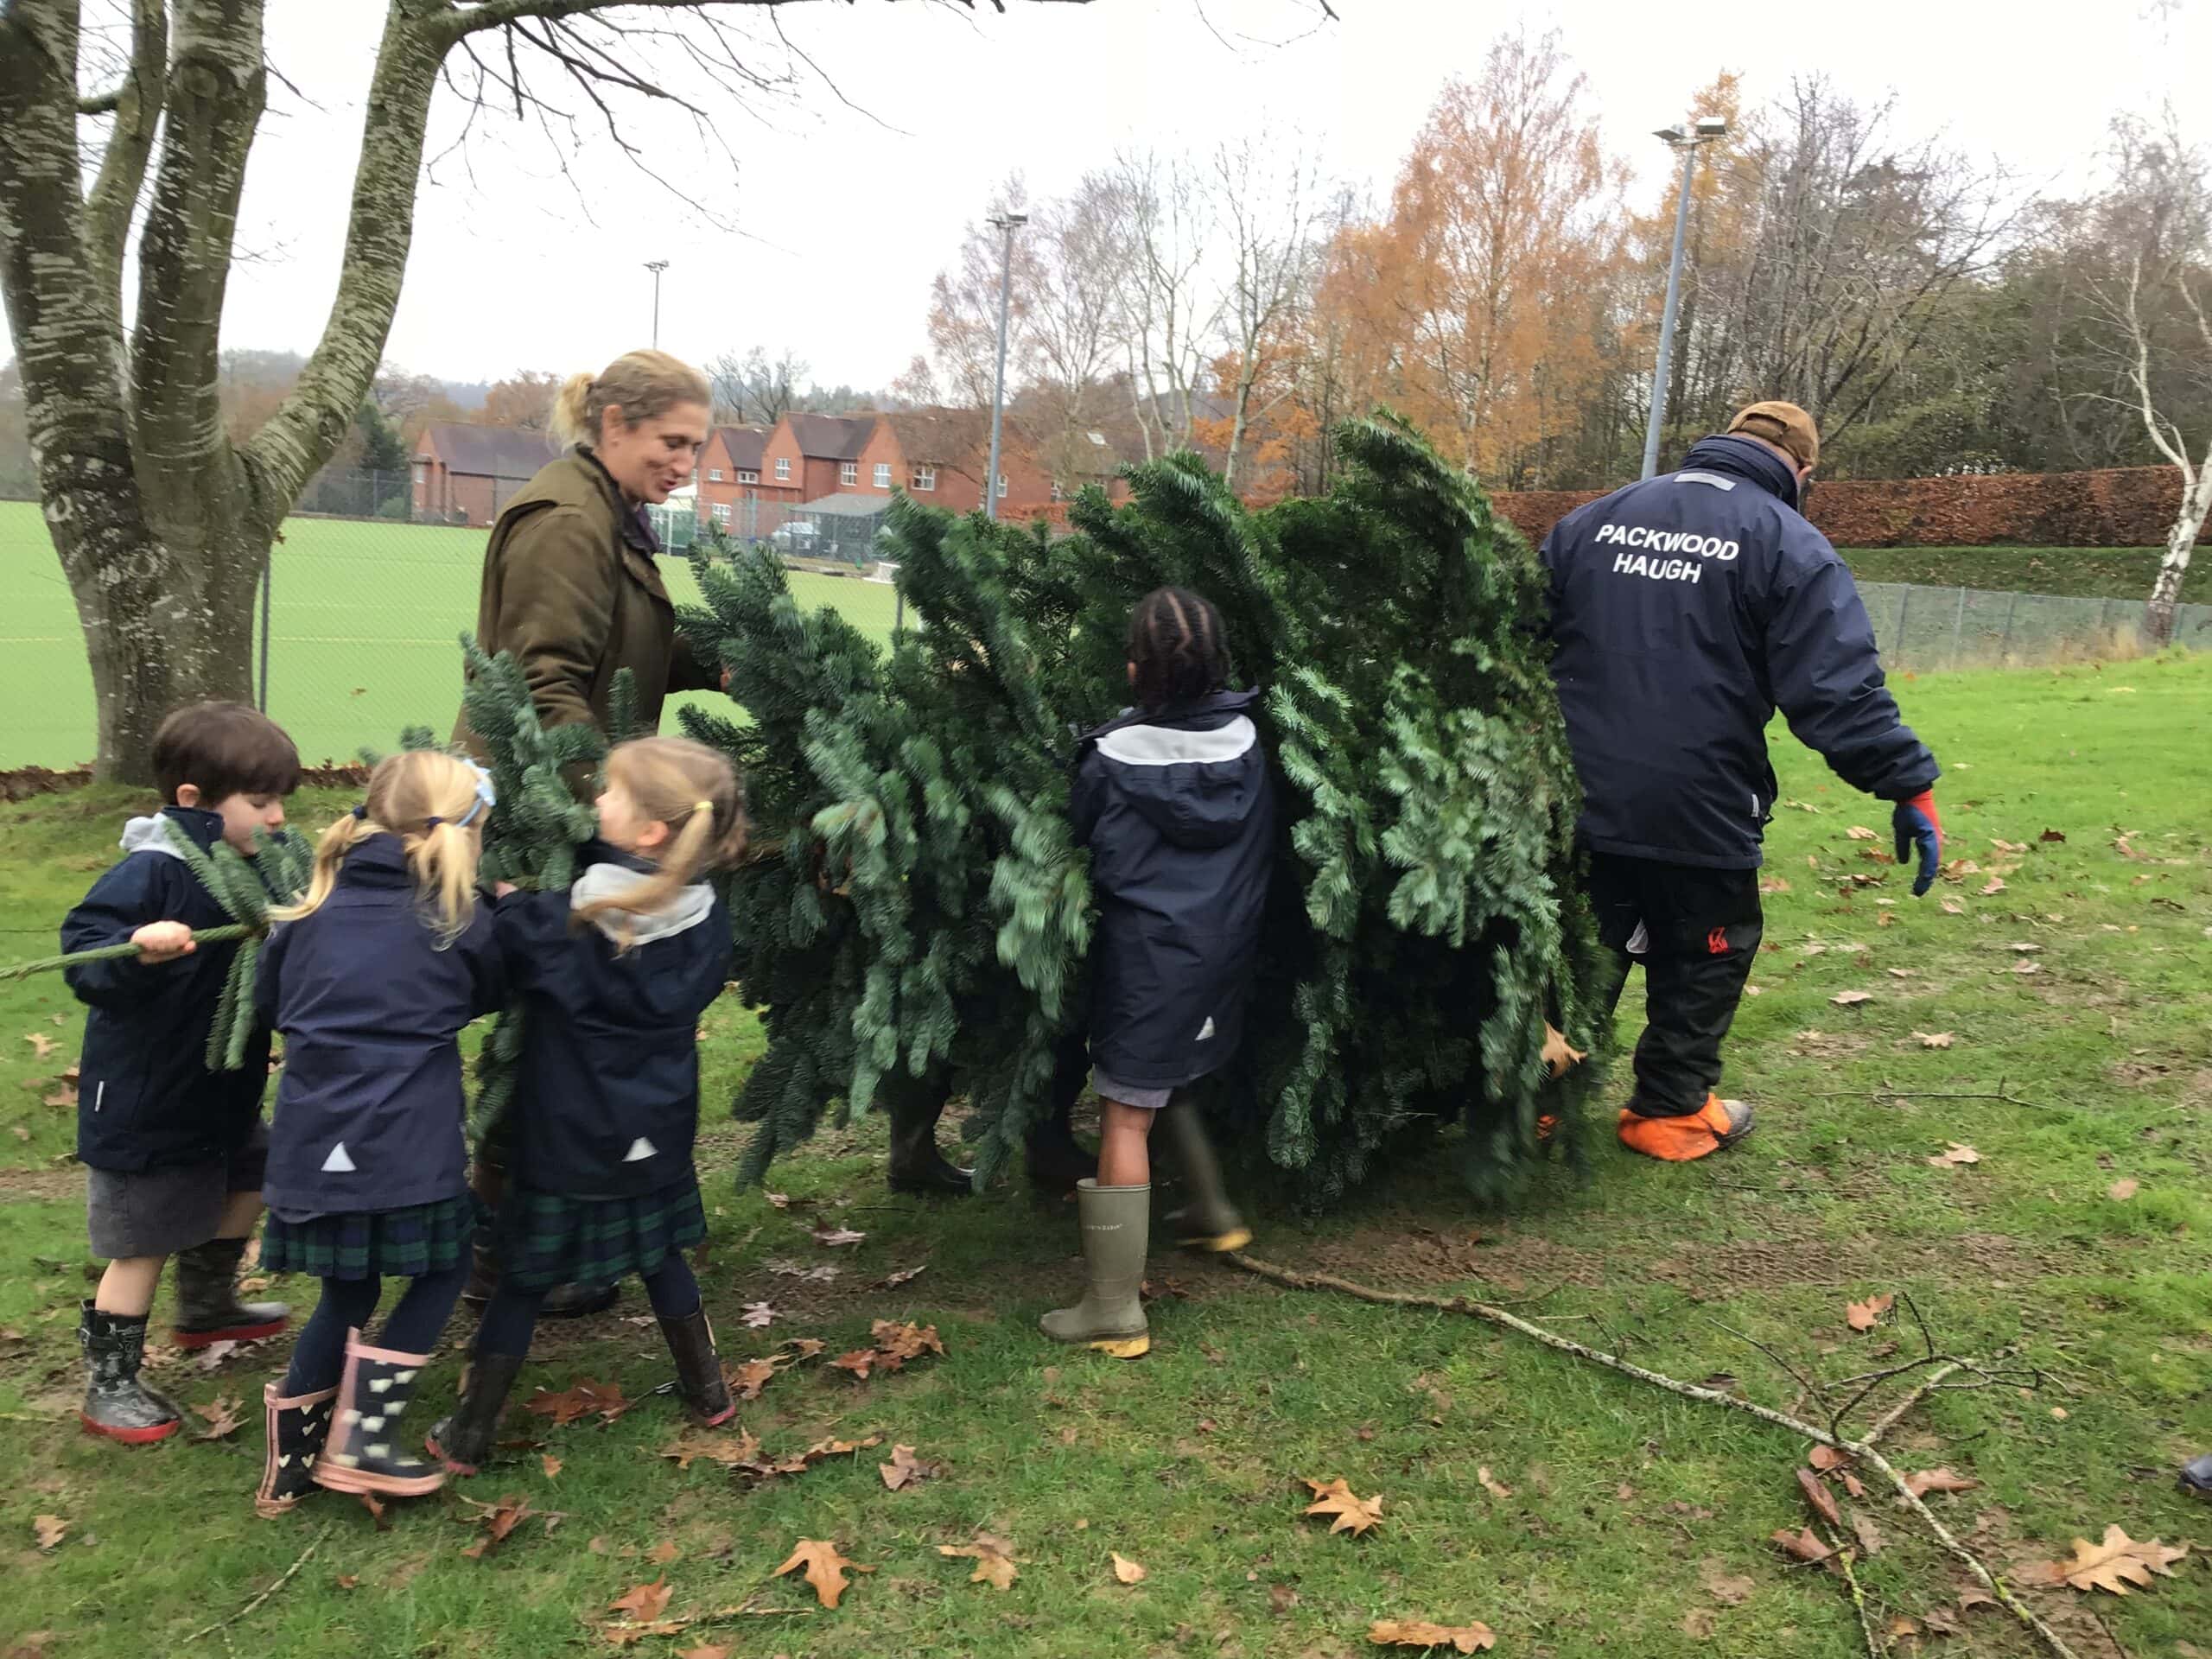 Packwood staff and pupils carrying a Christmas tree